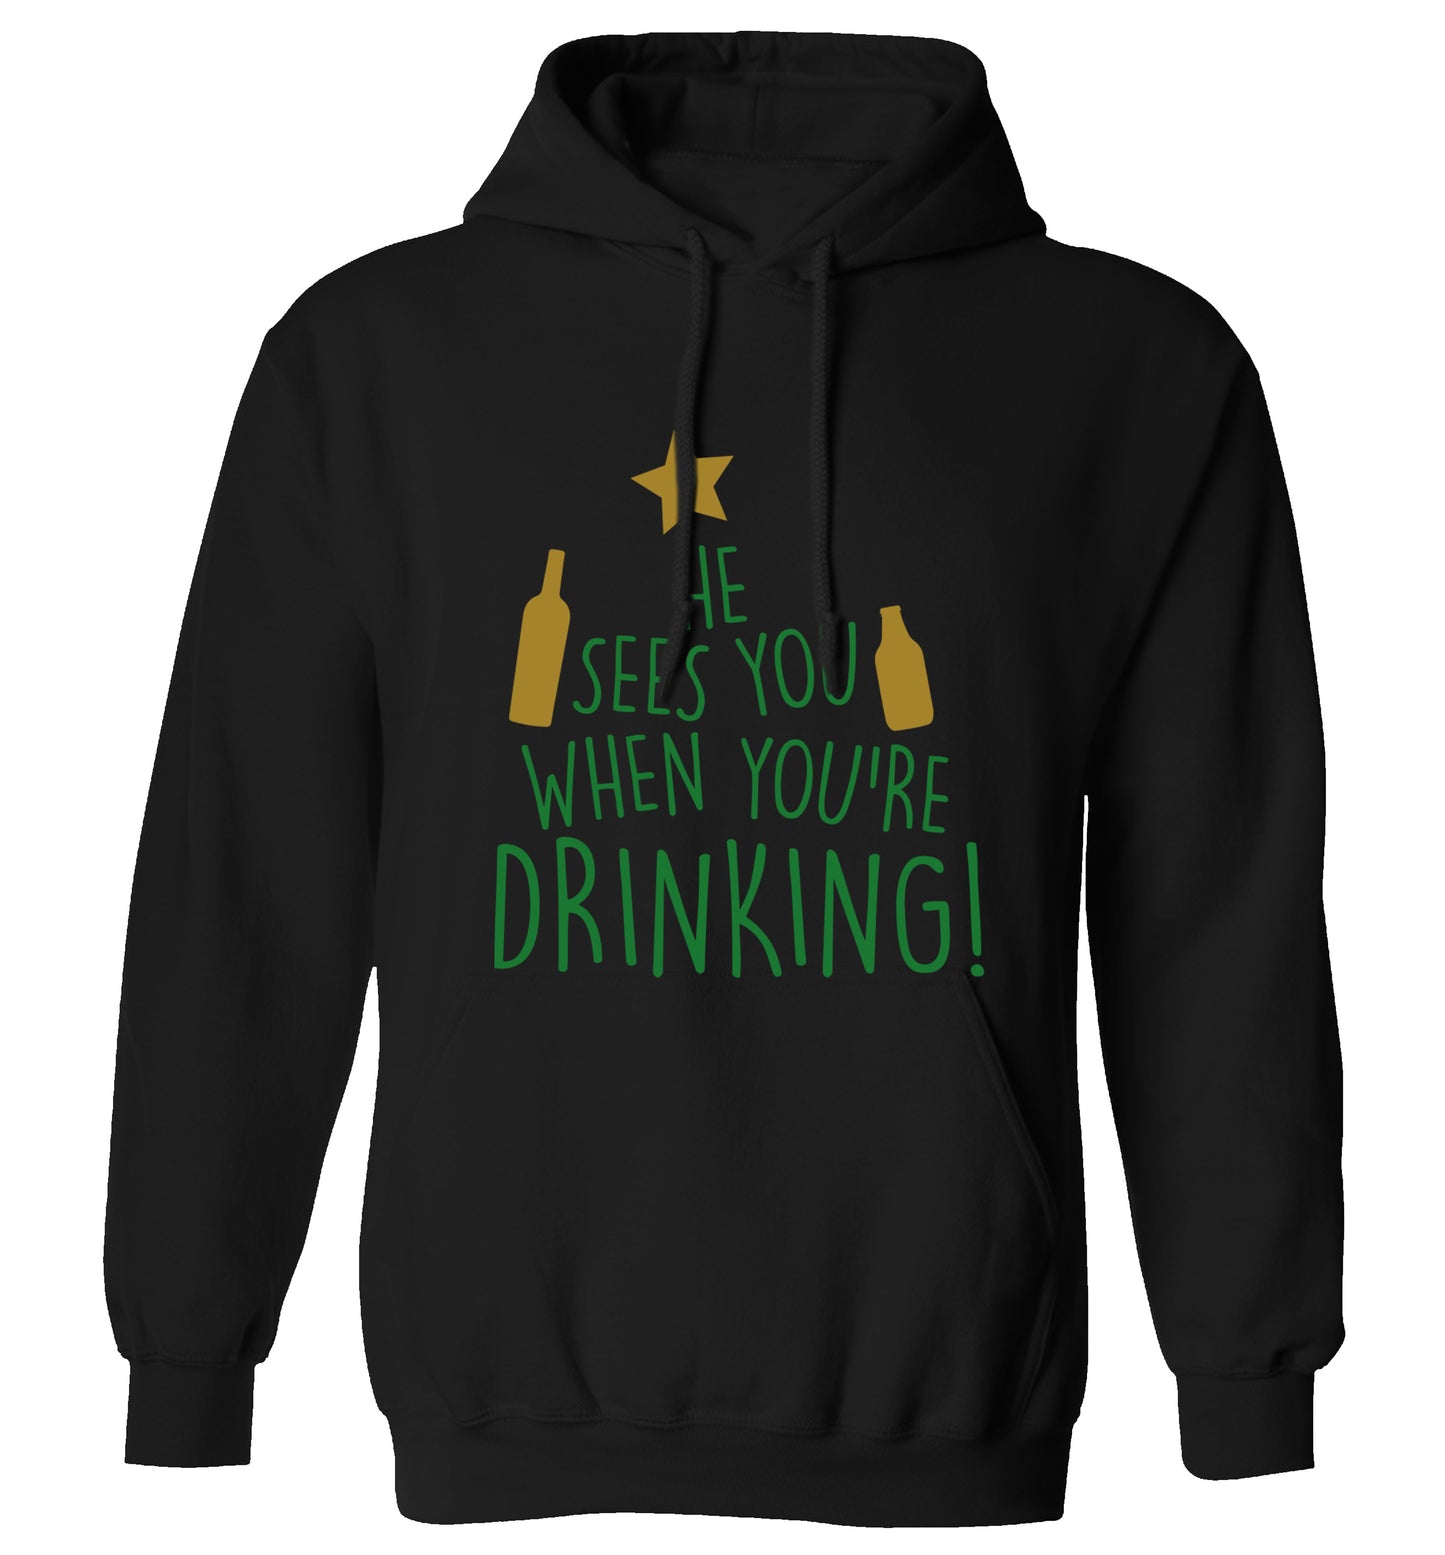 He sees you when you're drinking adults unisex black hoodie 2XL